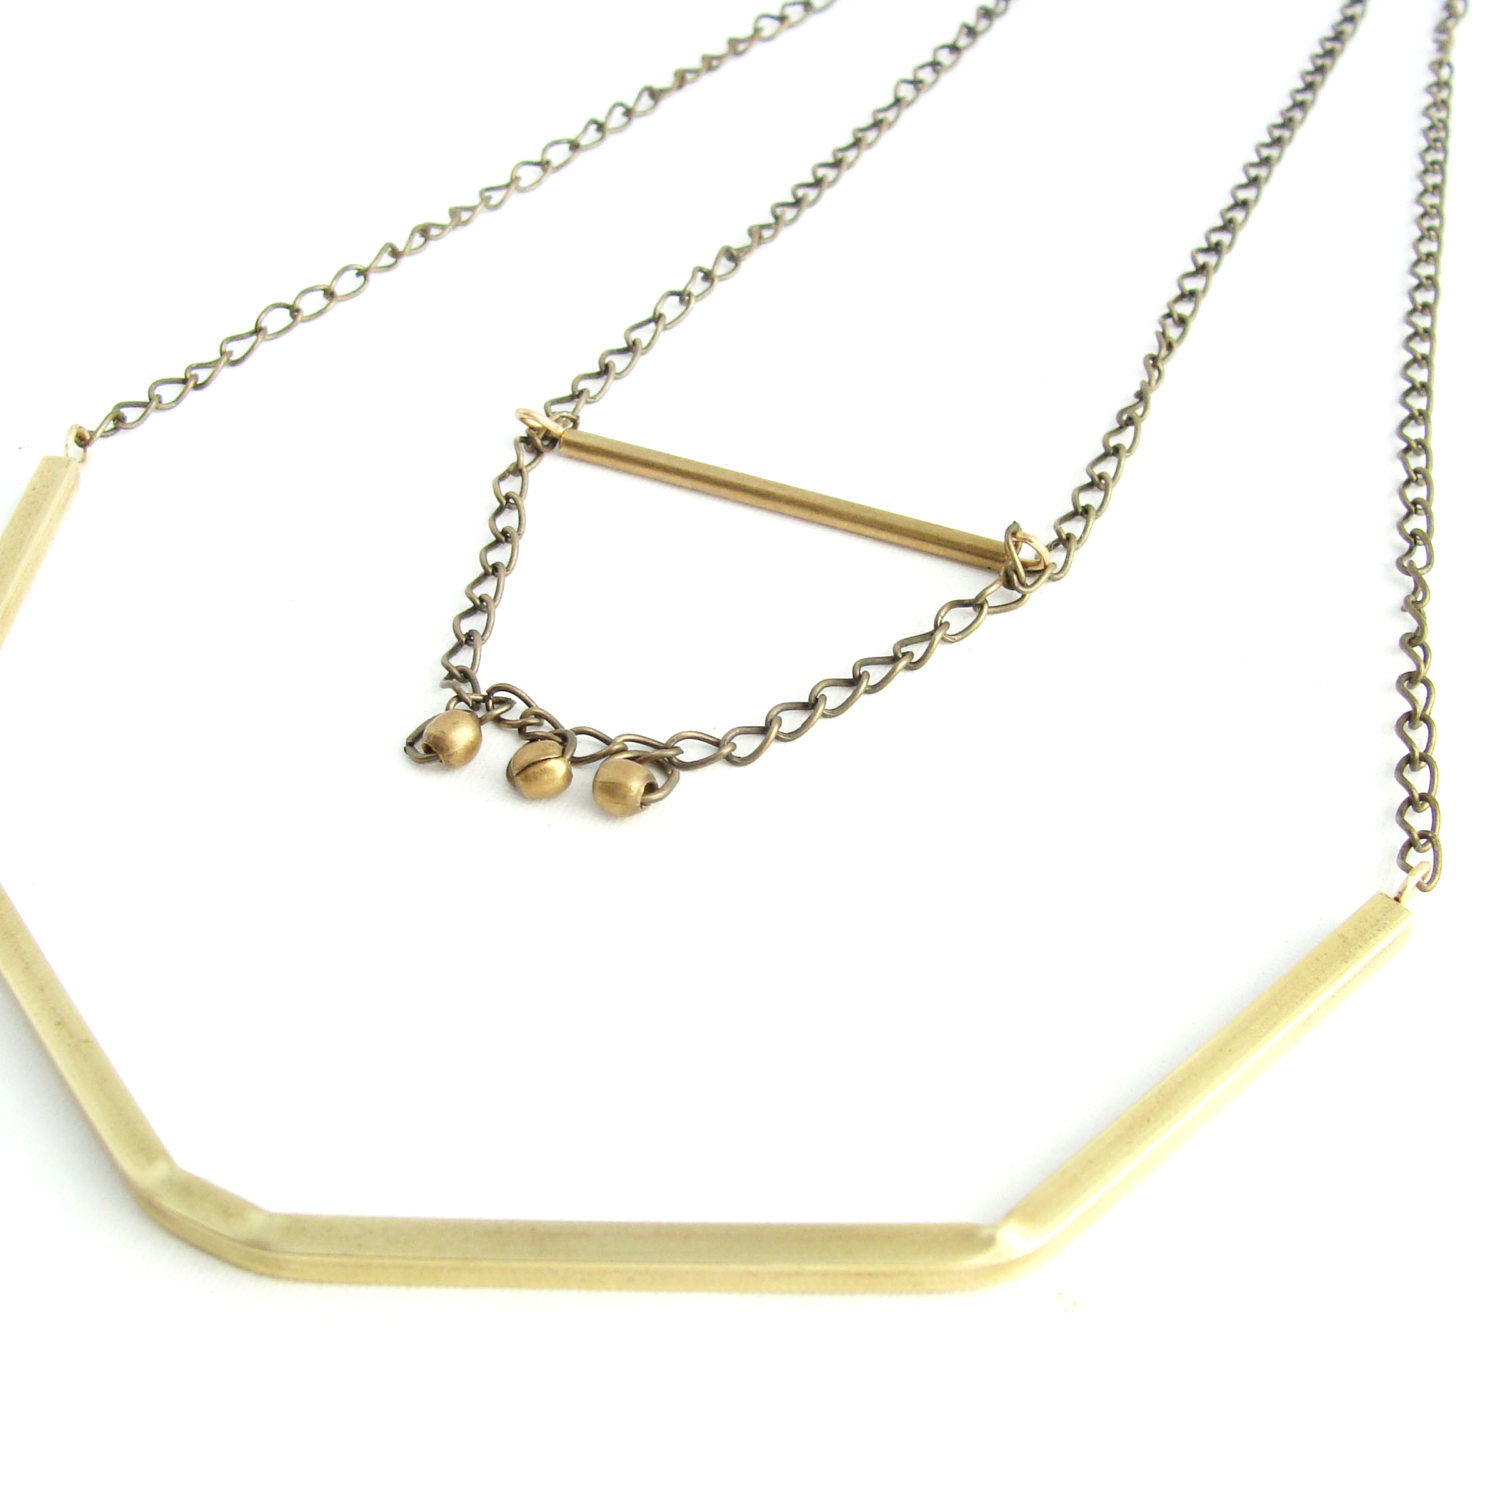 Edgy Tube Necklace || Modern Design 